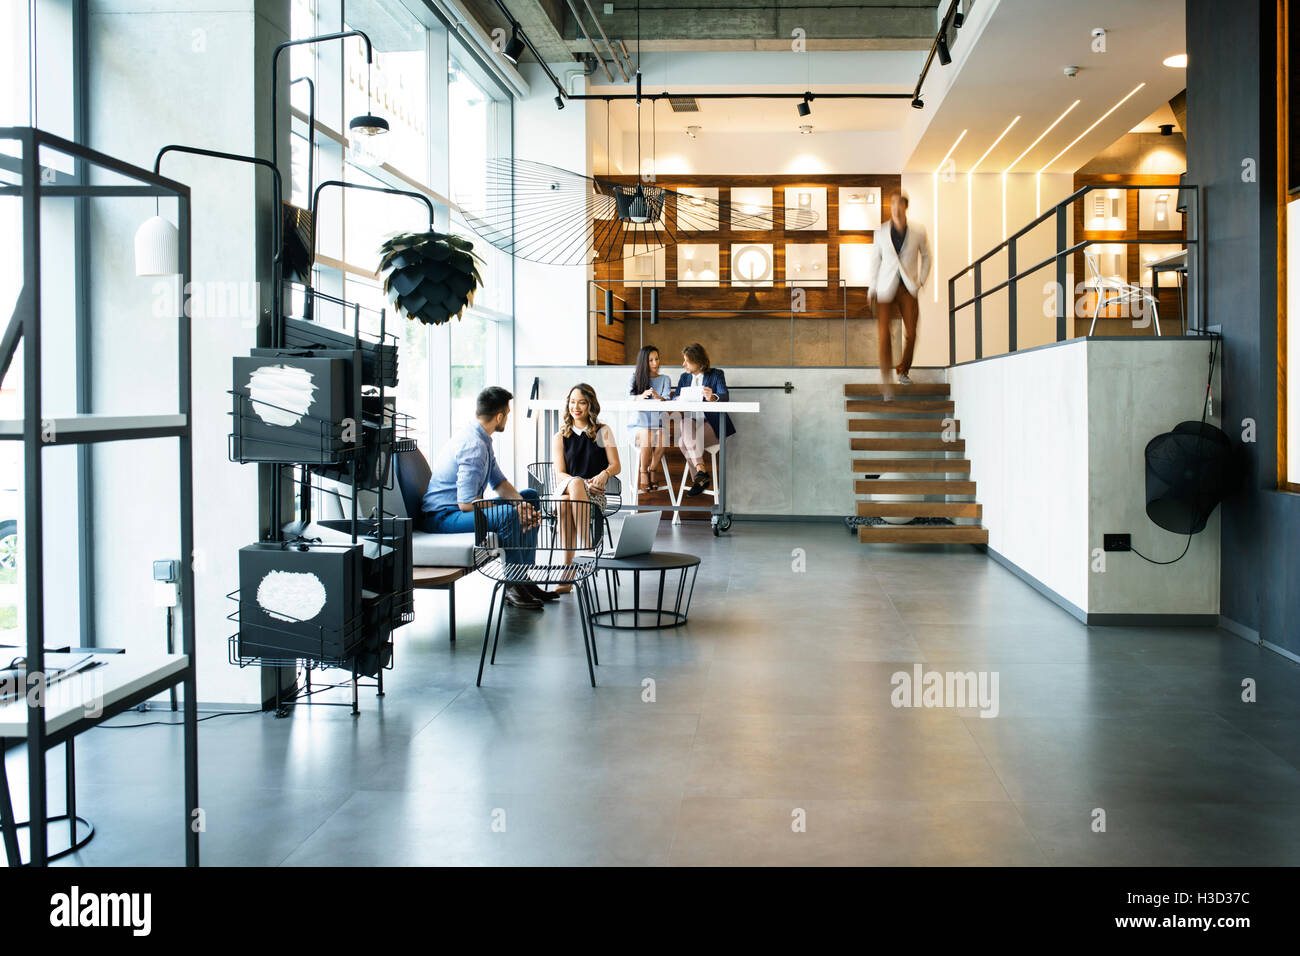 Business people working in brightly lit office Stock Photo